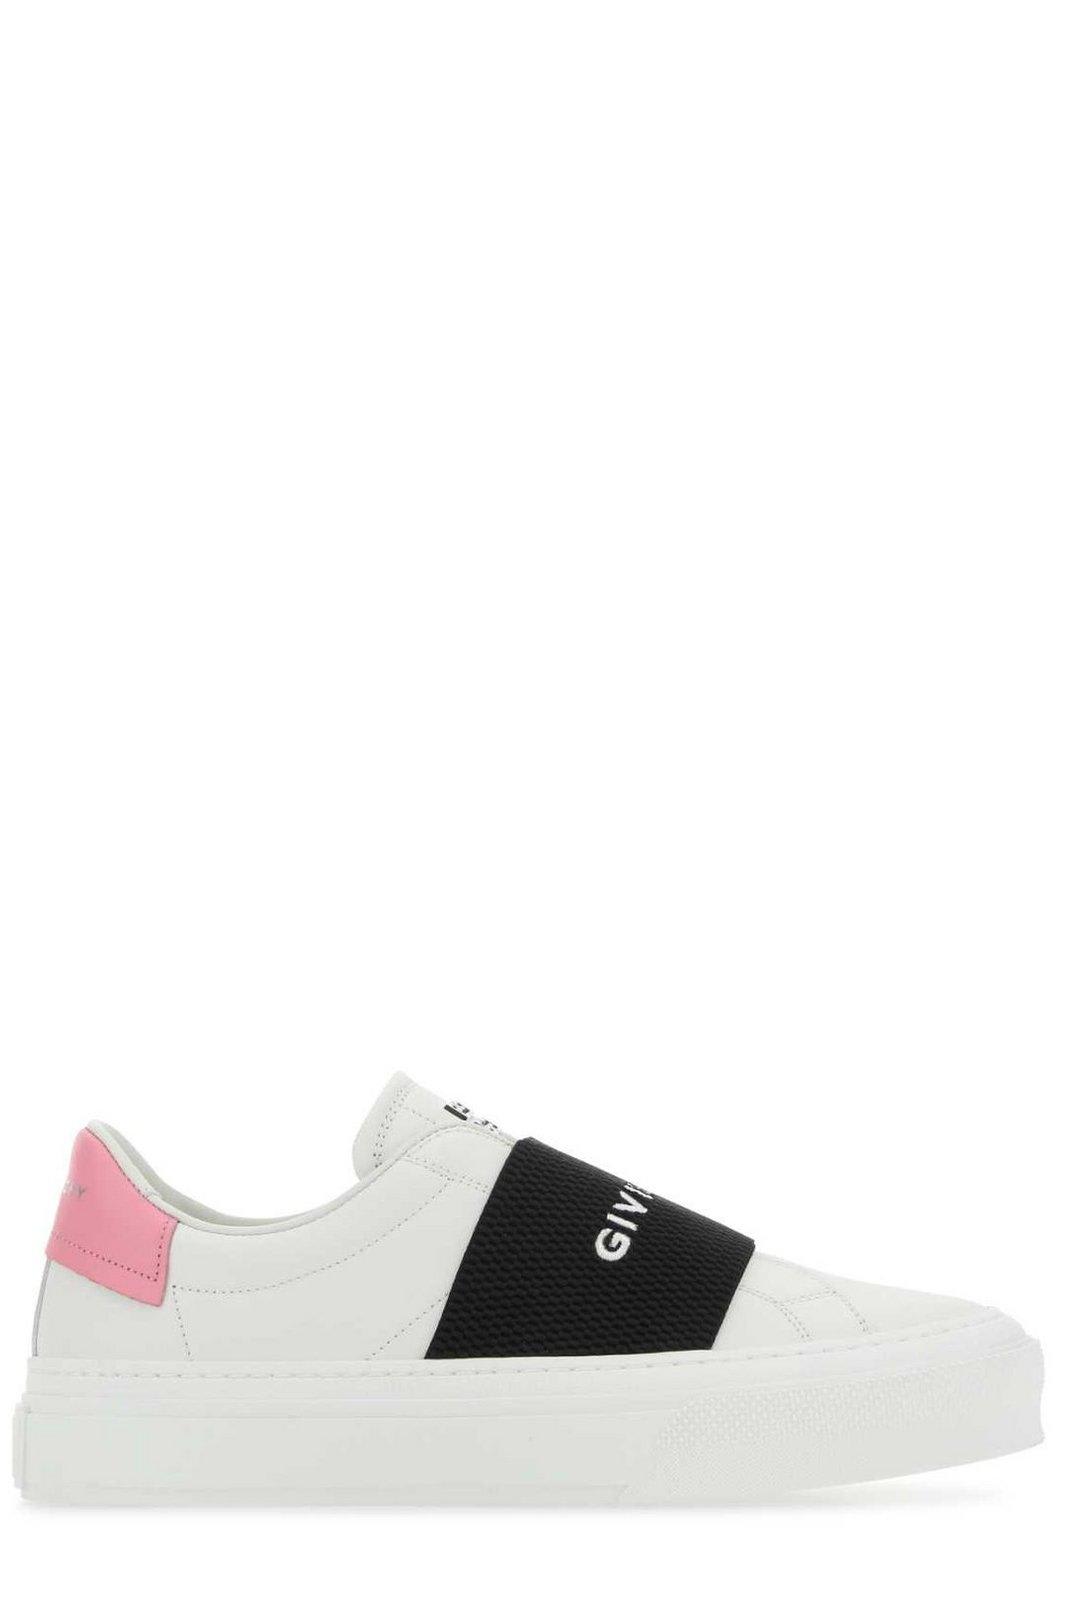 Shop Givenchy City Court Slip-on Sneakers